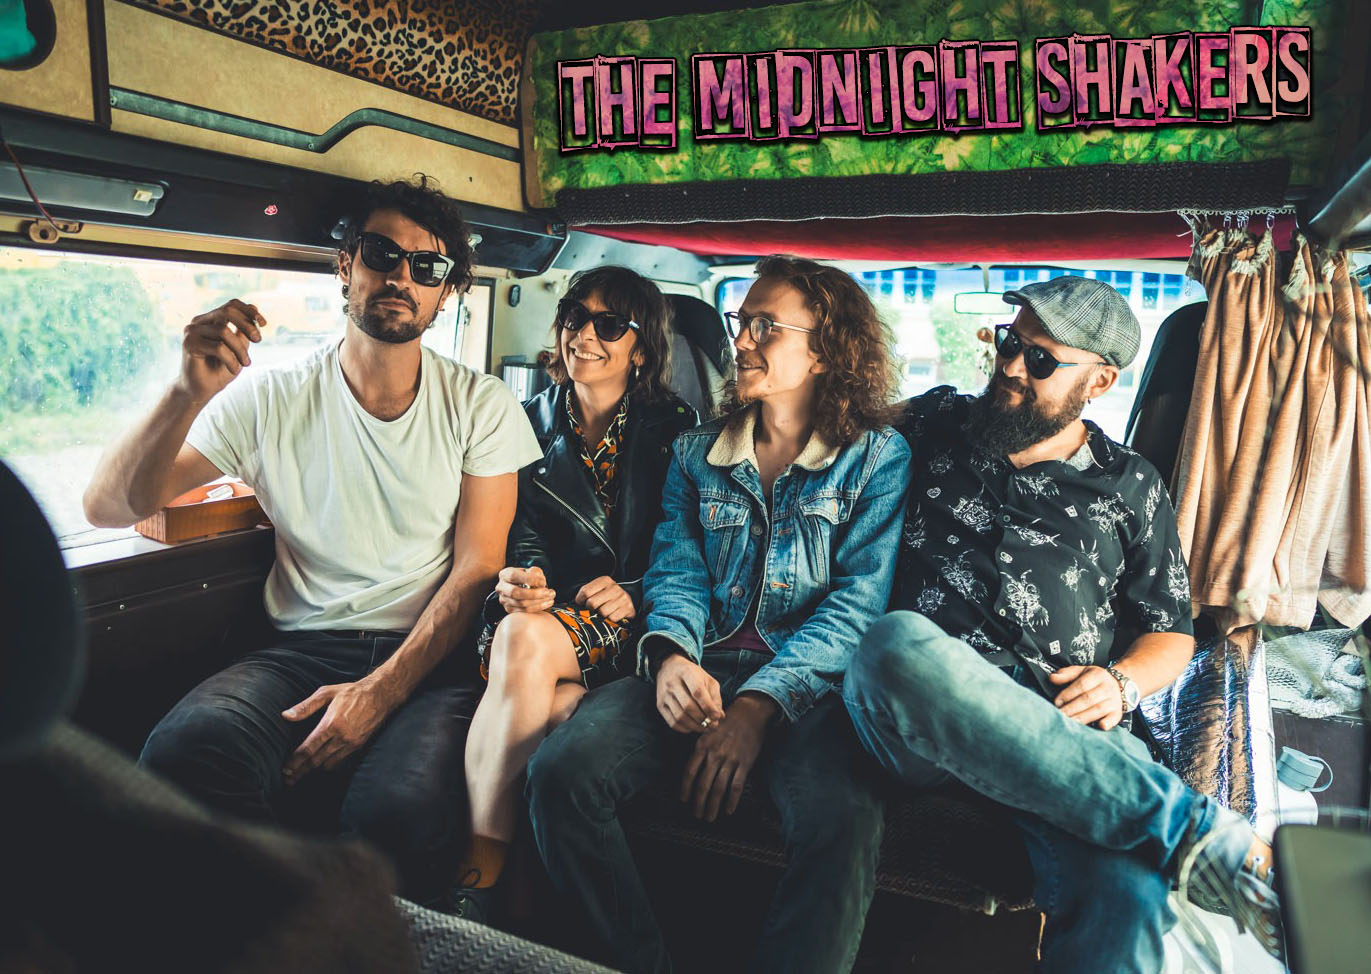 The Midnight Shakers